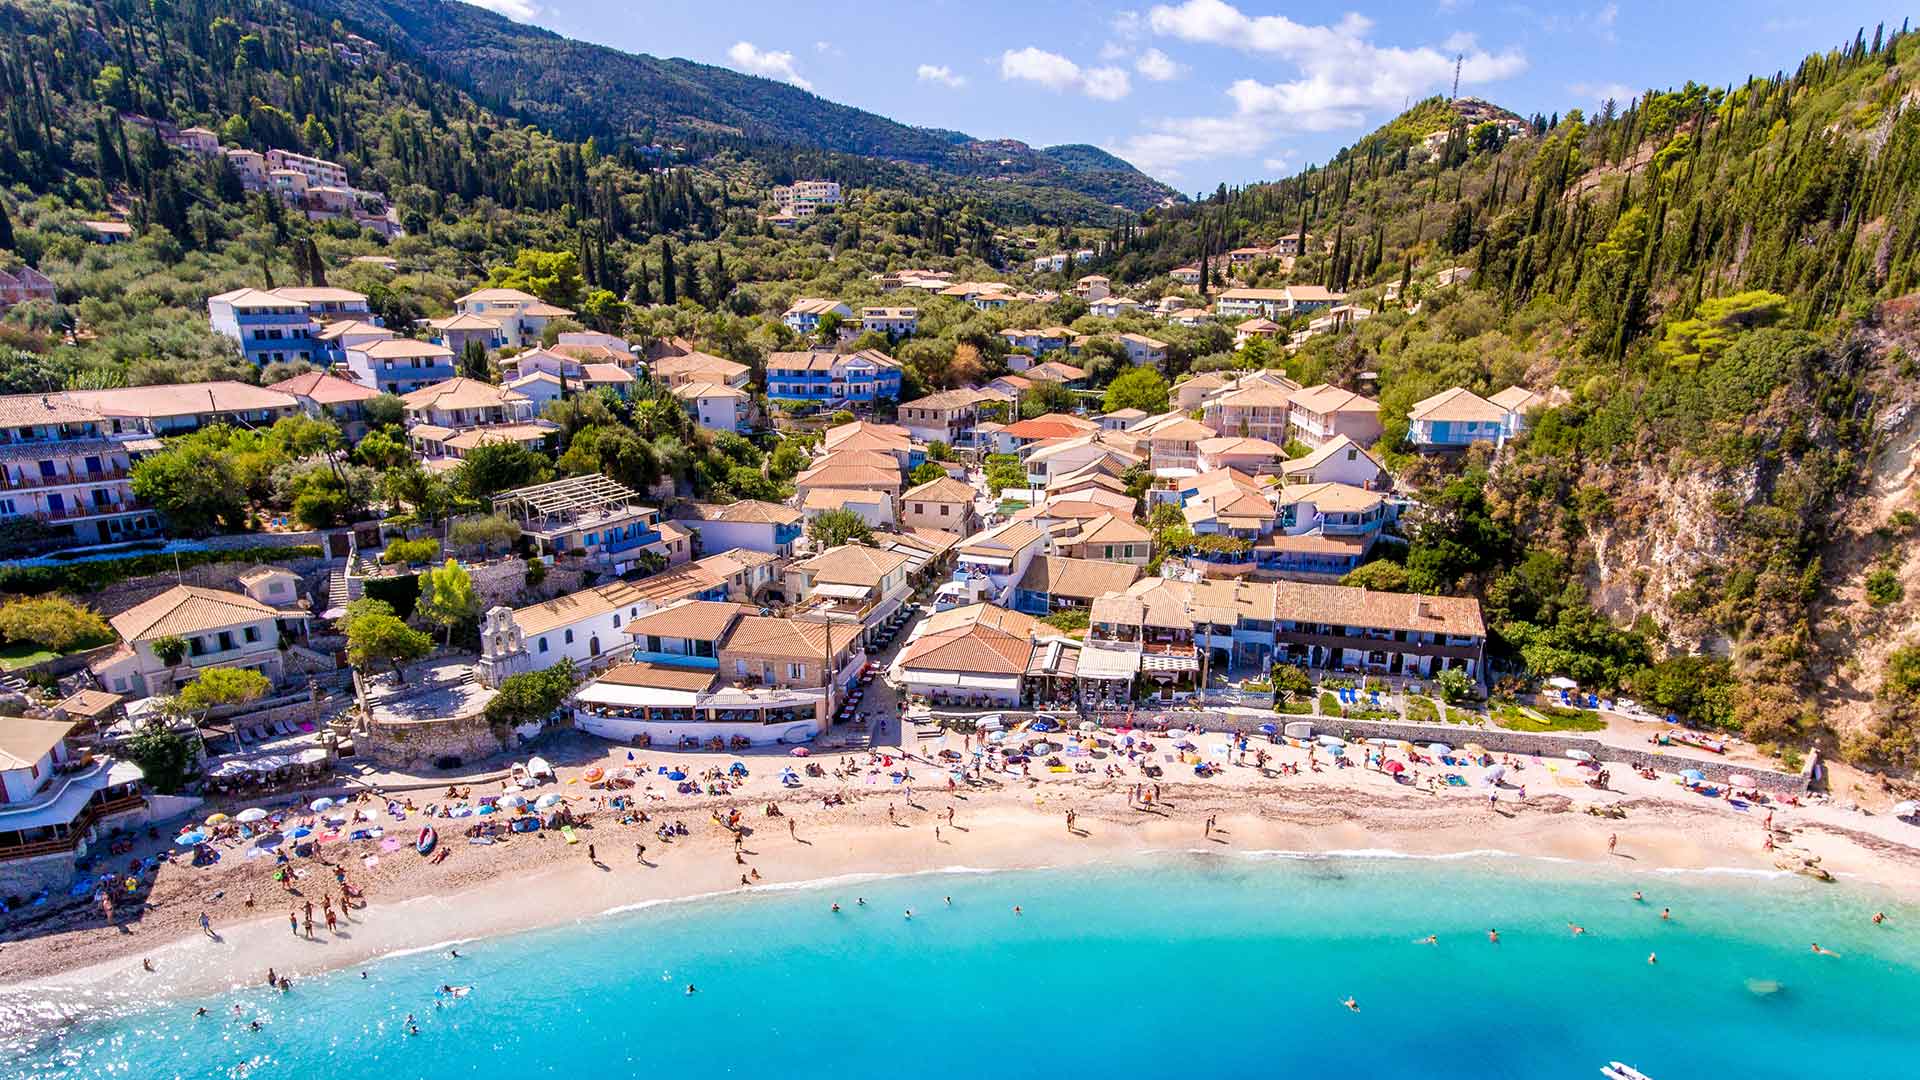 Aerial view of luxury properties in Lefkas, showcasing the island's upscale real estate market